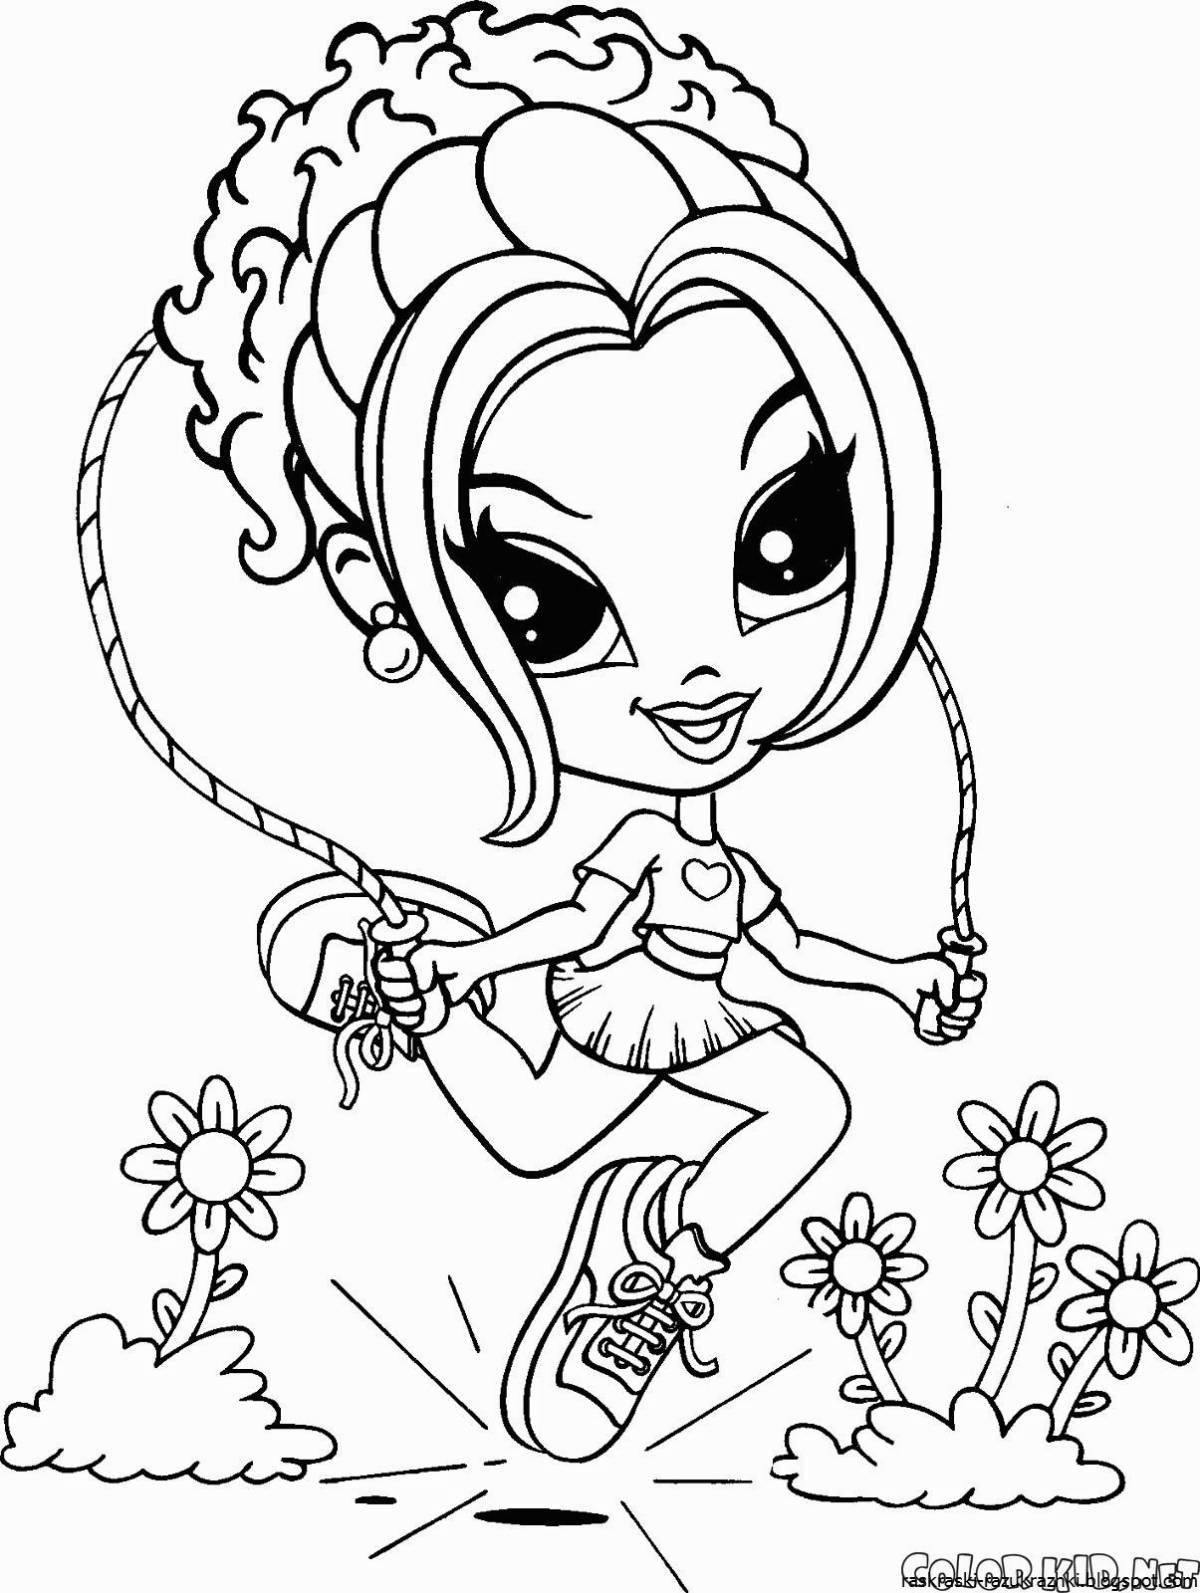 Fun coloring pages of all kinds